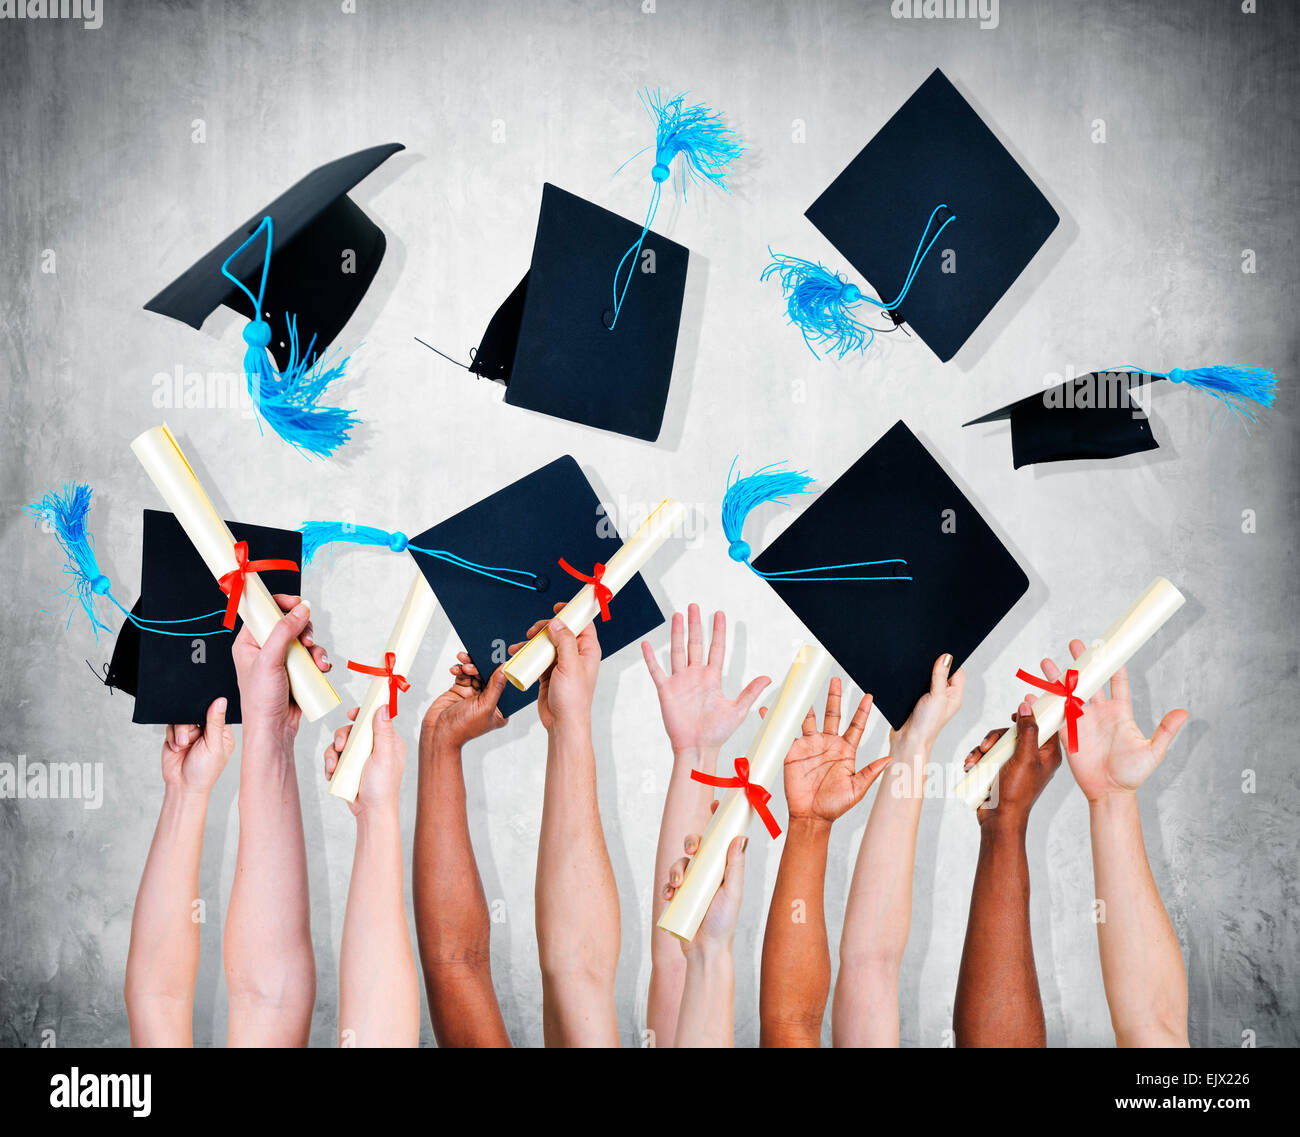 Hands shot of people celebrating their graduation. Stock Photo